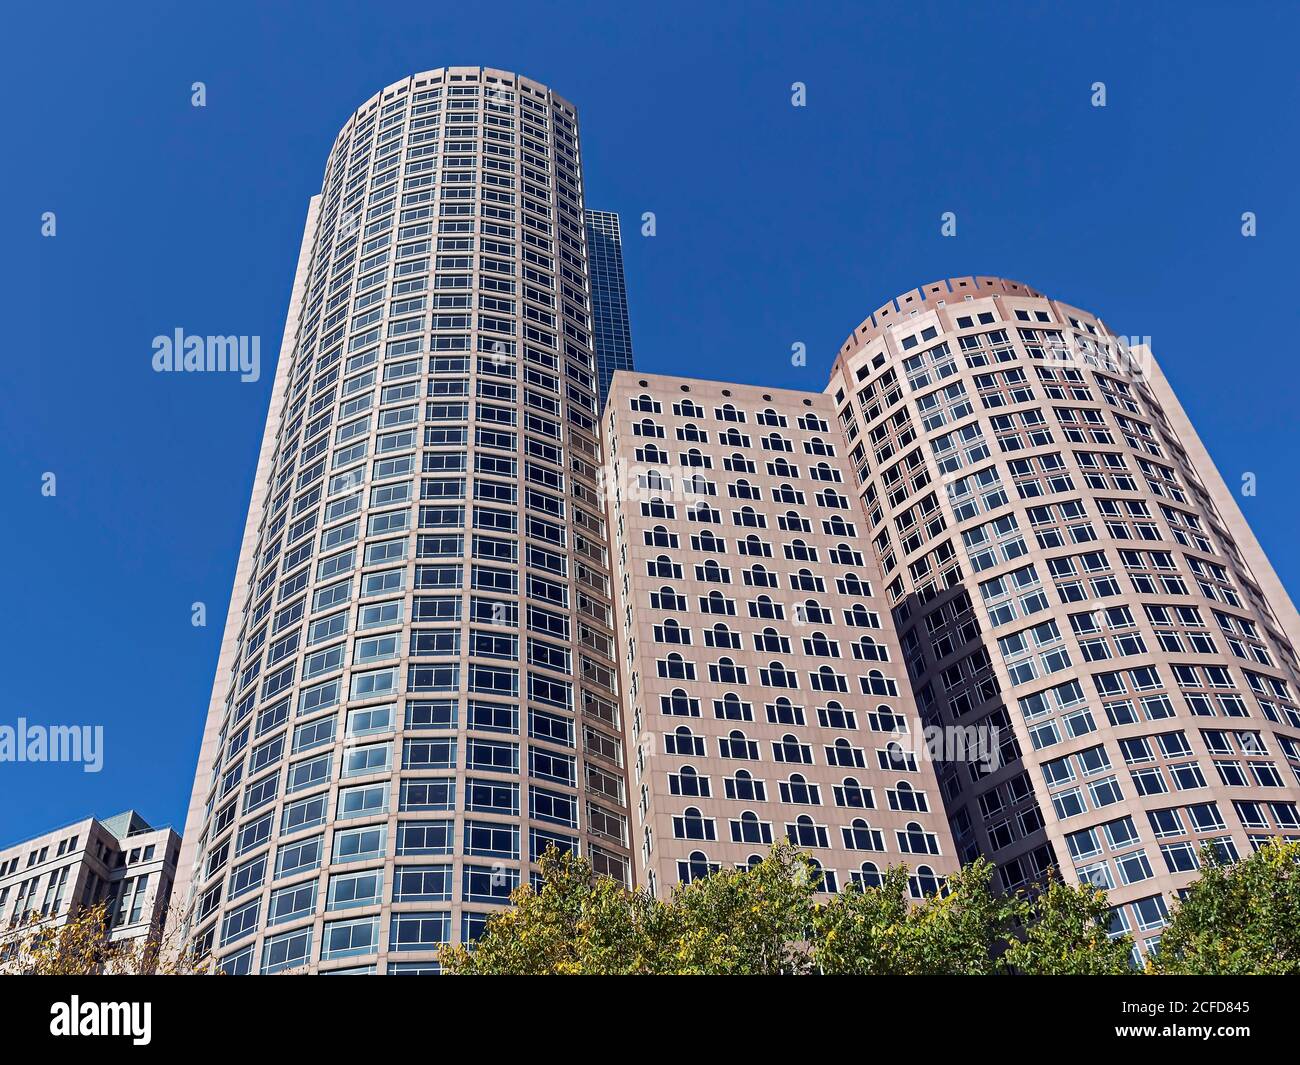 Skyscrapers, One International Place Business Center, Facade, Financial District, Boston, Massachusetts, New England, USA Stock Photo